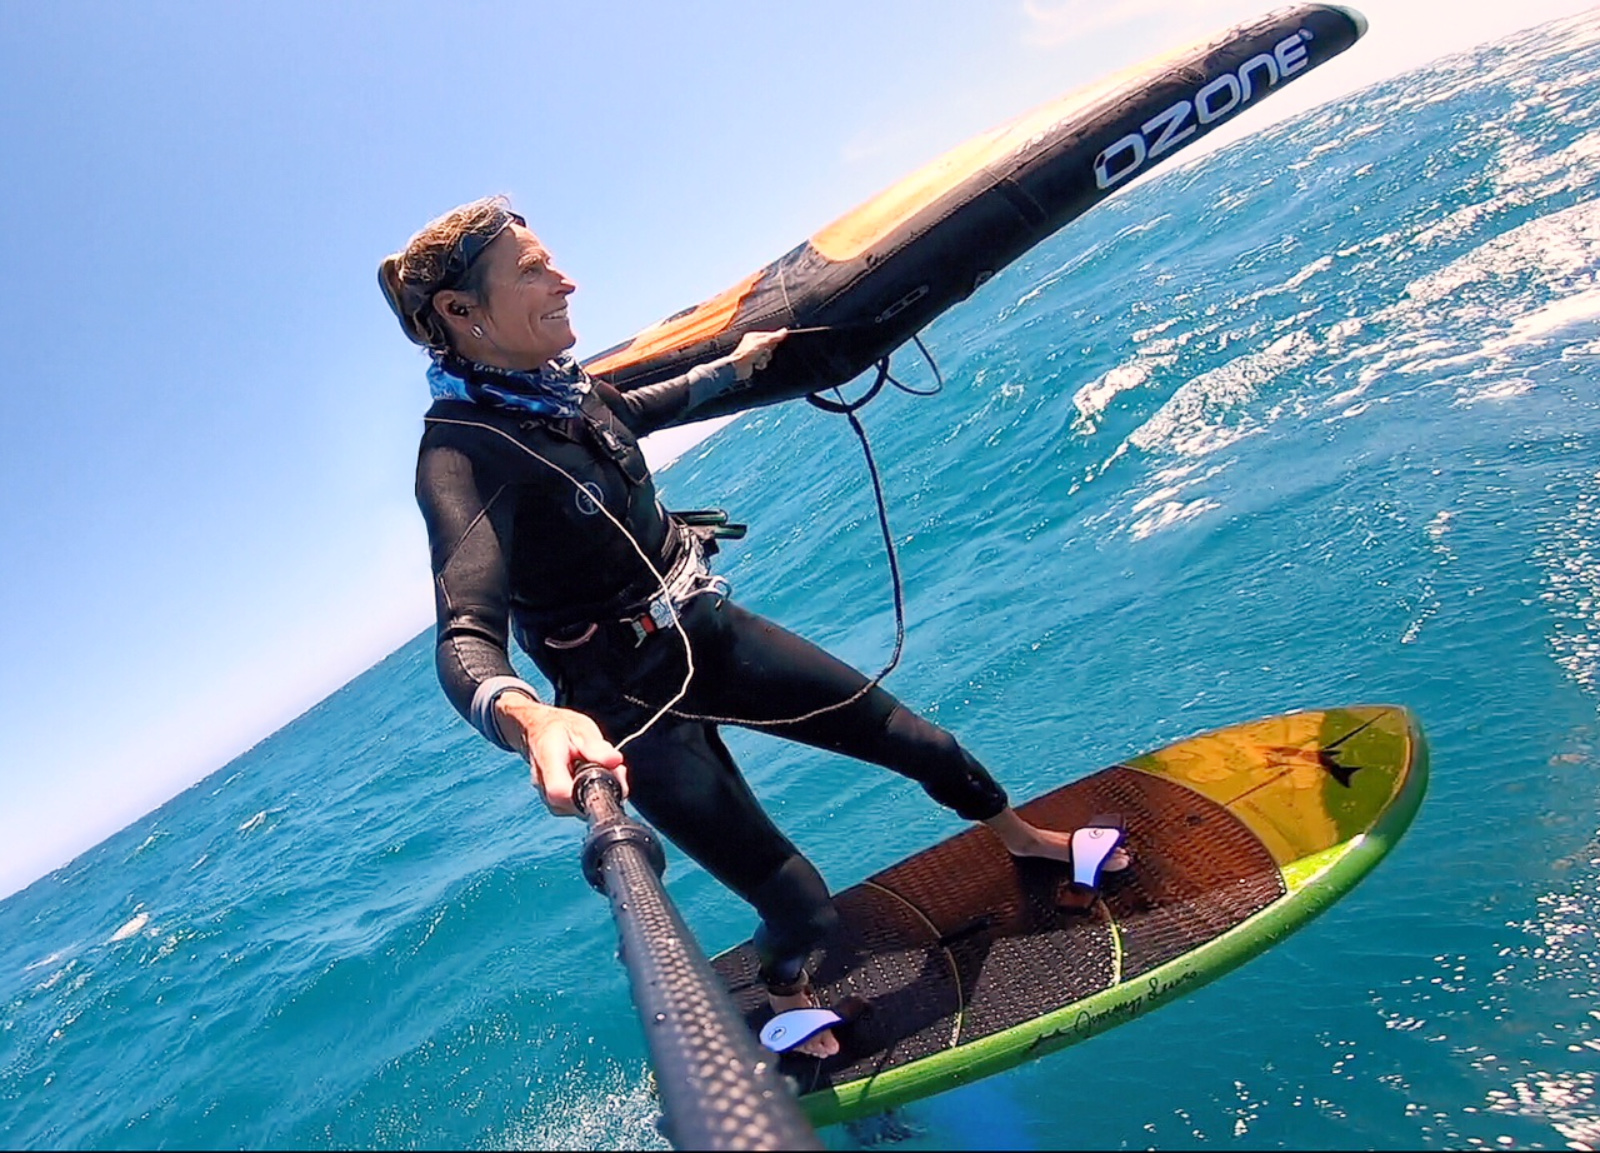 Foot strap placement - GoFoil, Ozone team rider - Cynthia Brown